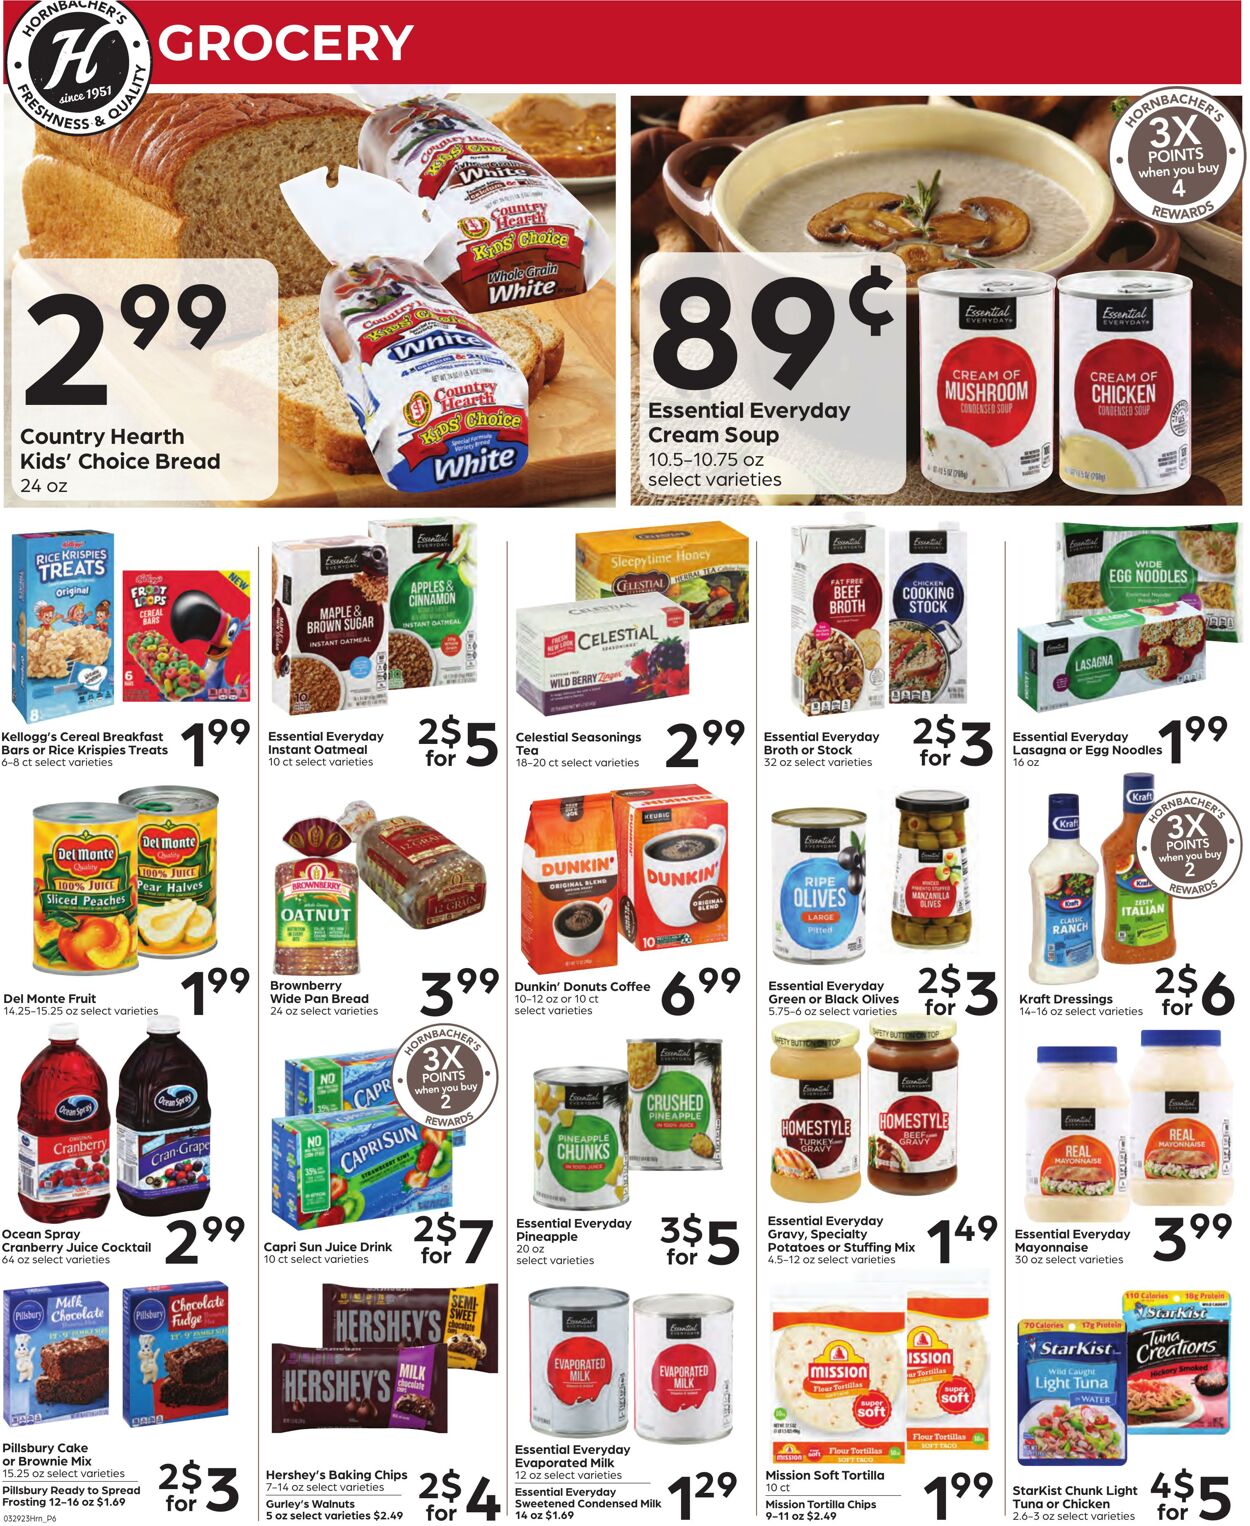 Weekly ad Hornbacher's 03/29/2023 - 04/04/2023